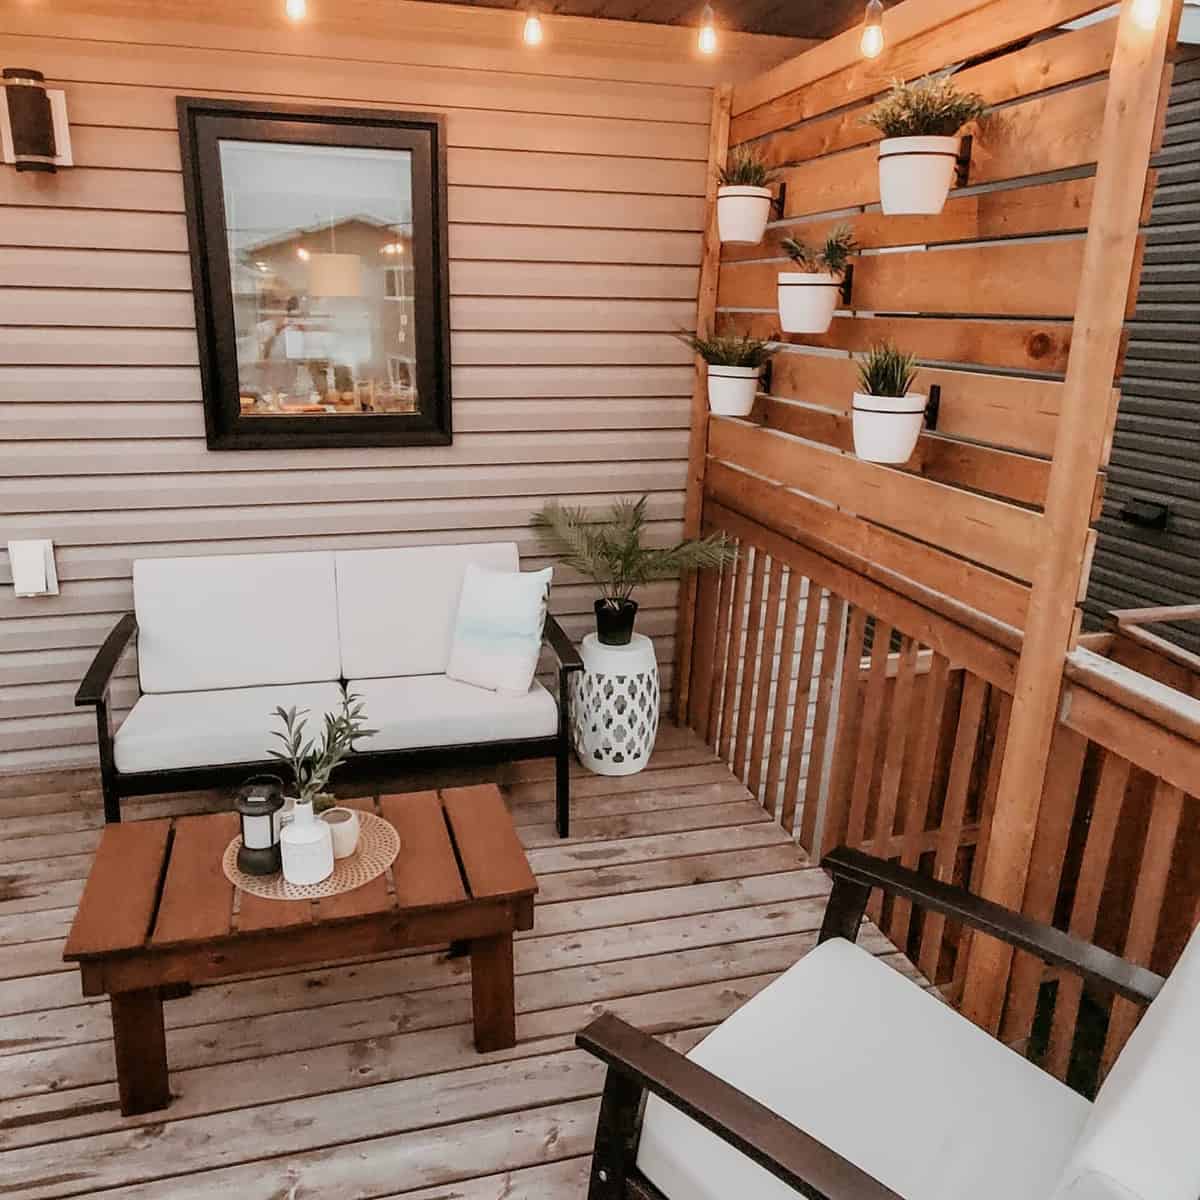 Wooden deck, vertical potted plants, small sofa